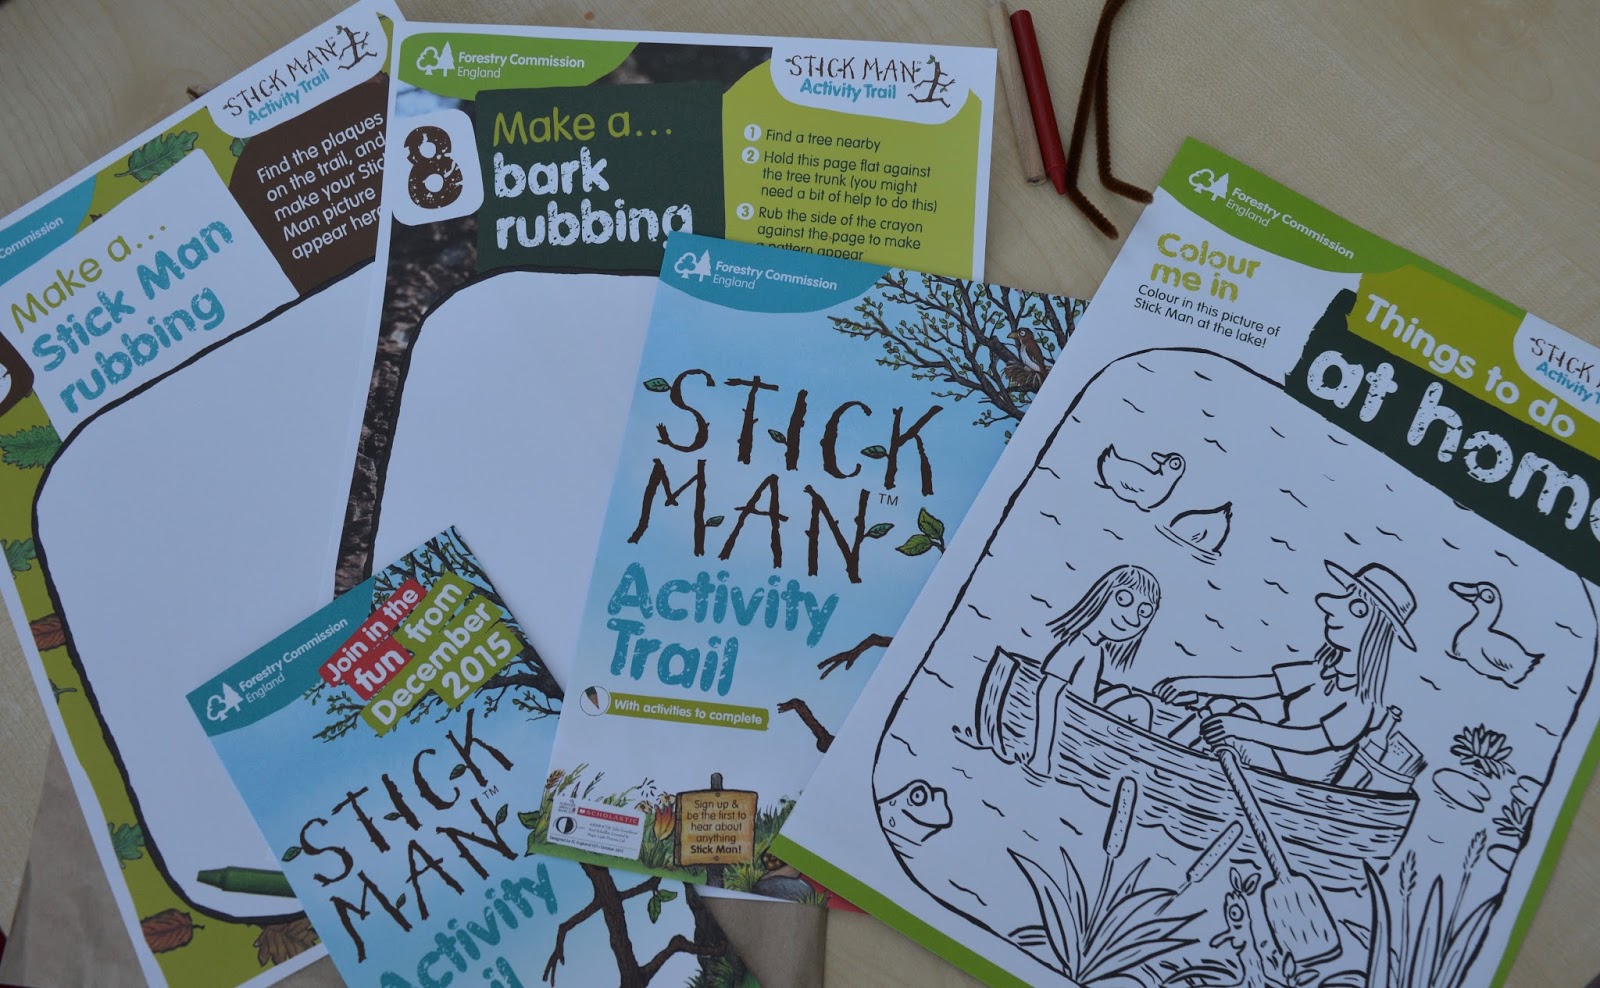 Stick Man Trail Hamsterley Forest Activity Trail Pack